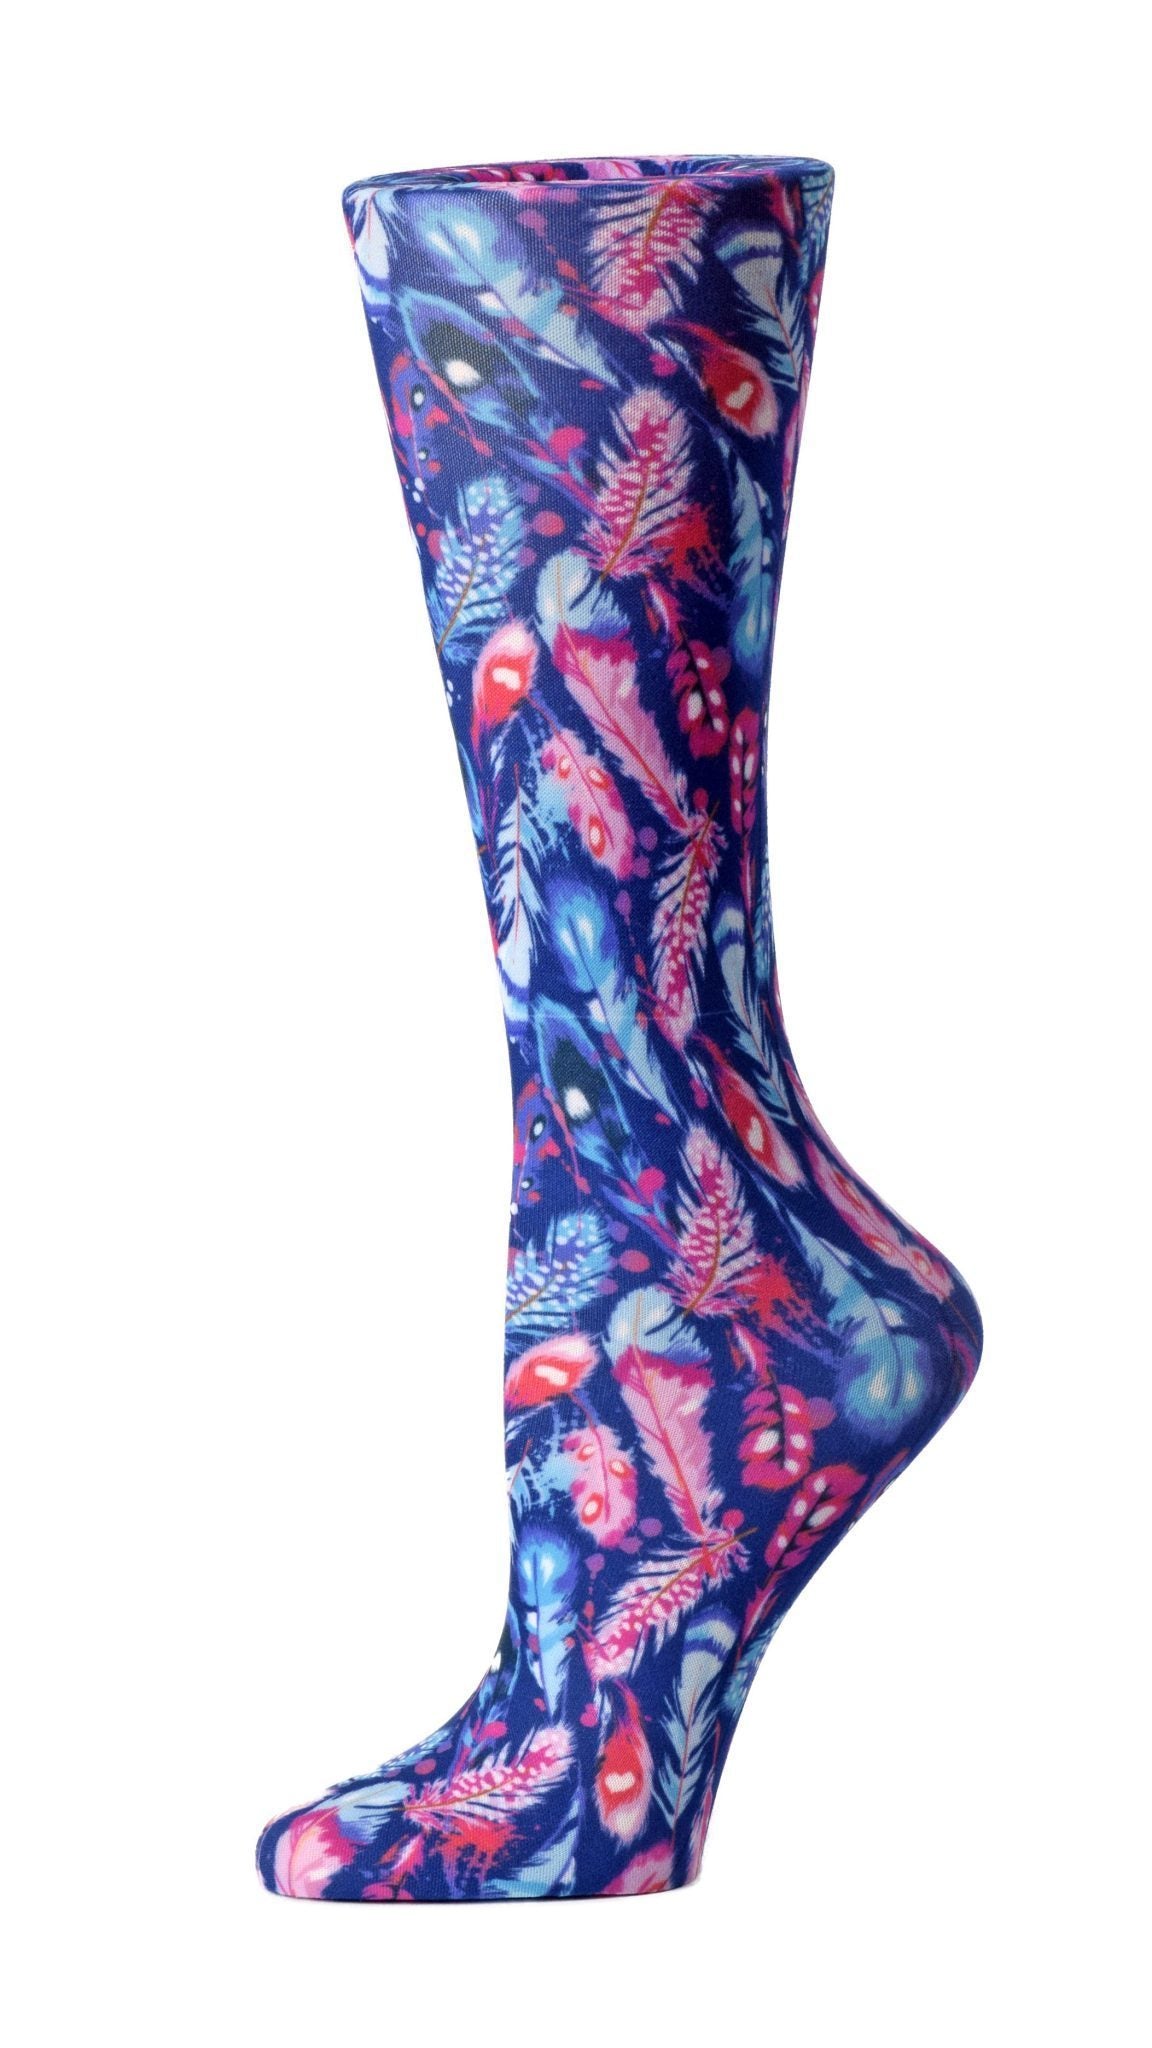 Cutieful Moderate Compression Socks 10-18 mmHg Knit in Print Patterns Feathers at Parker's Clothing and Shoes.